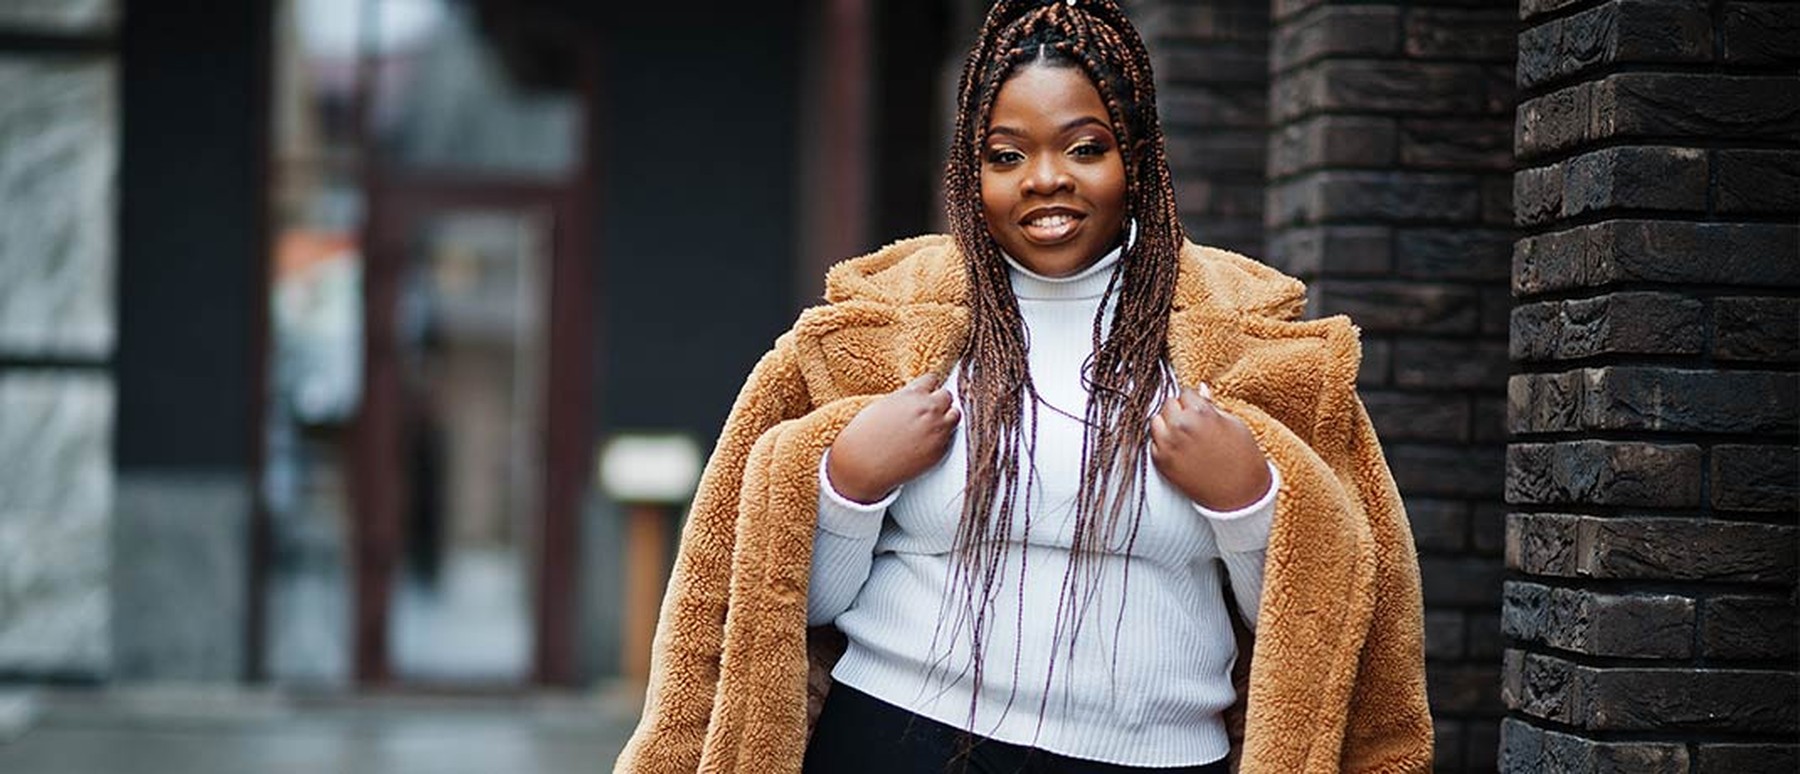 Plus size black woman in stylish outfit